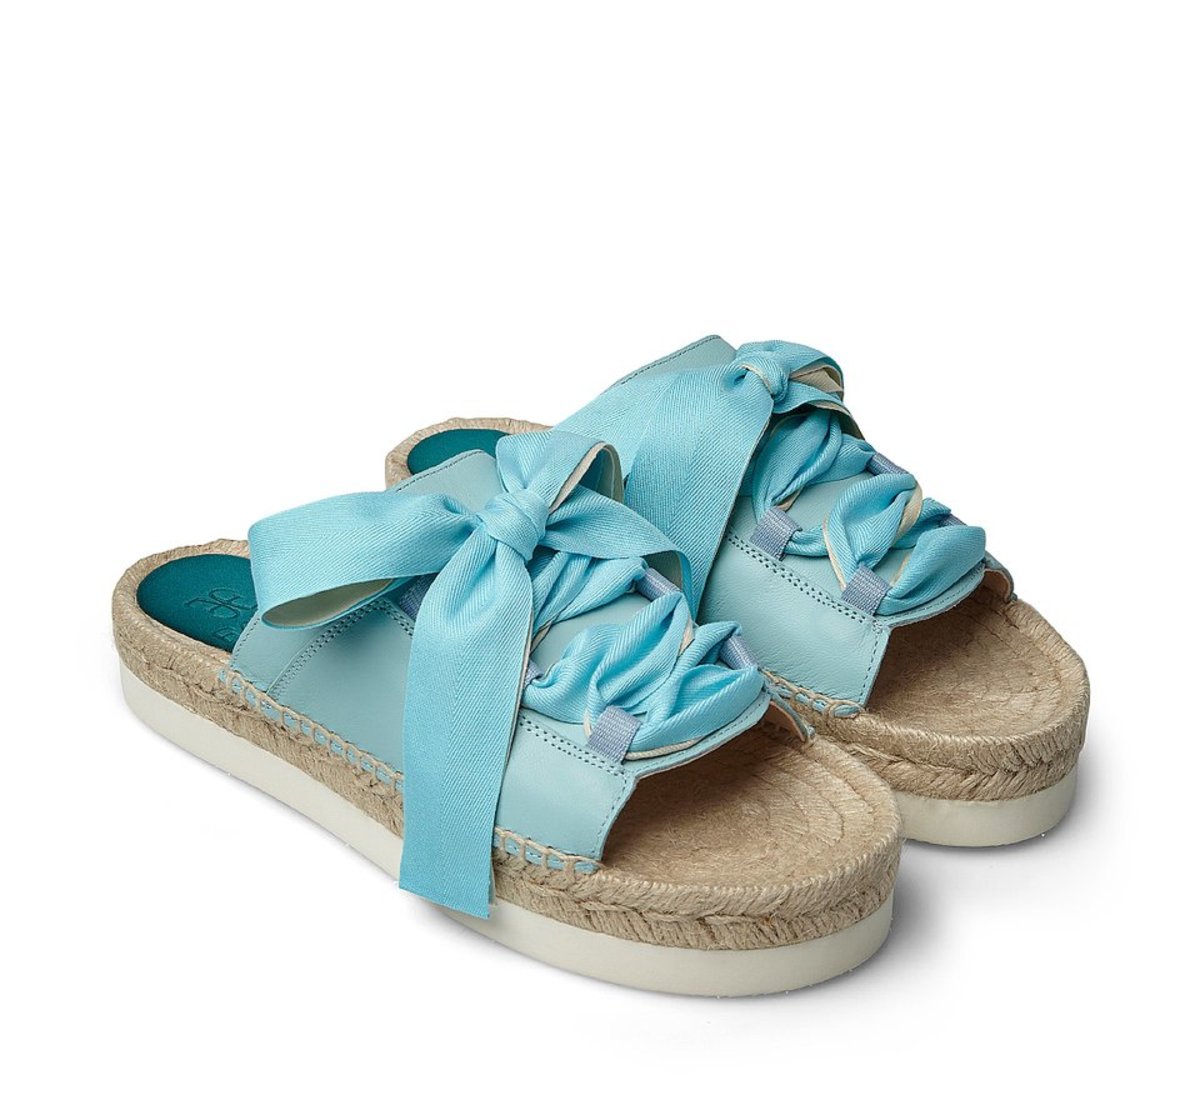 Espadrilles in nappa leather